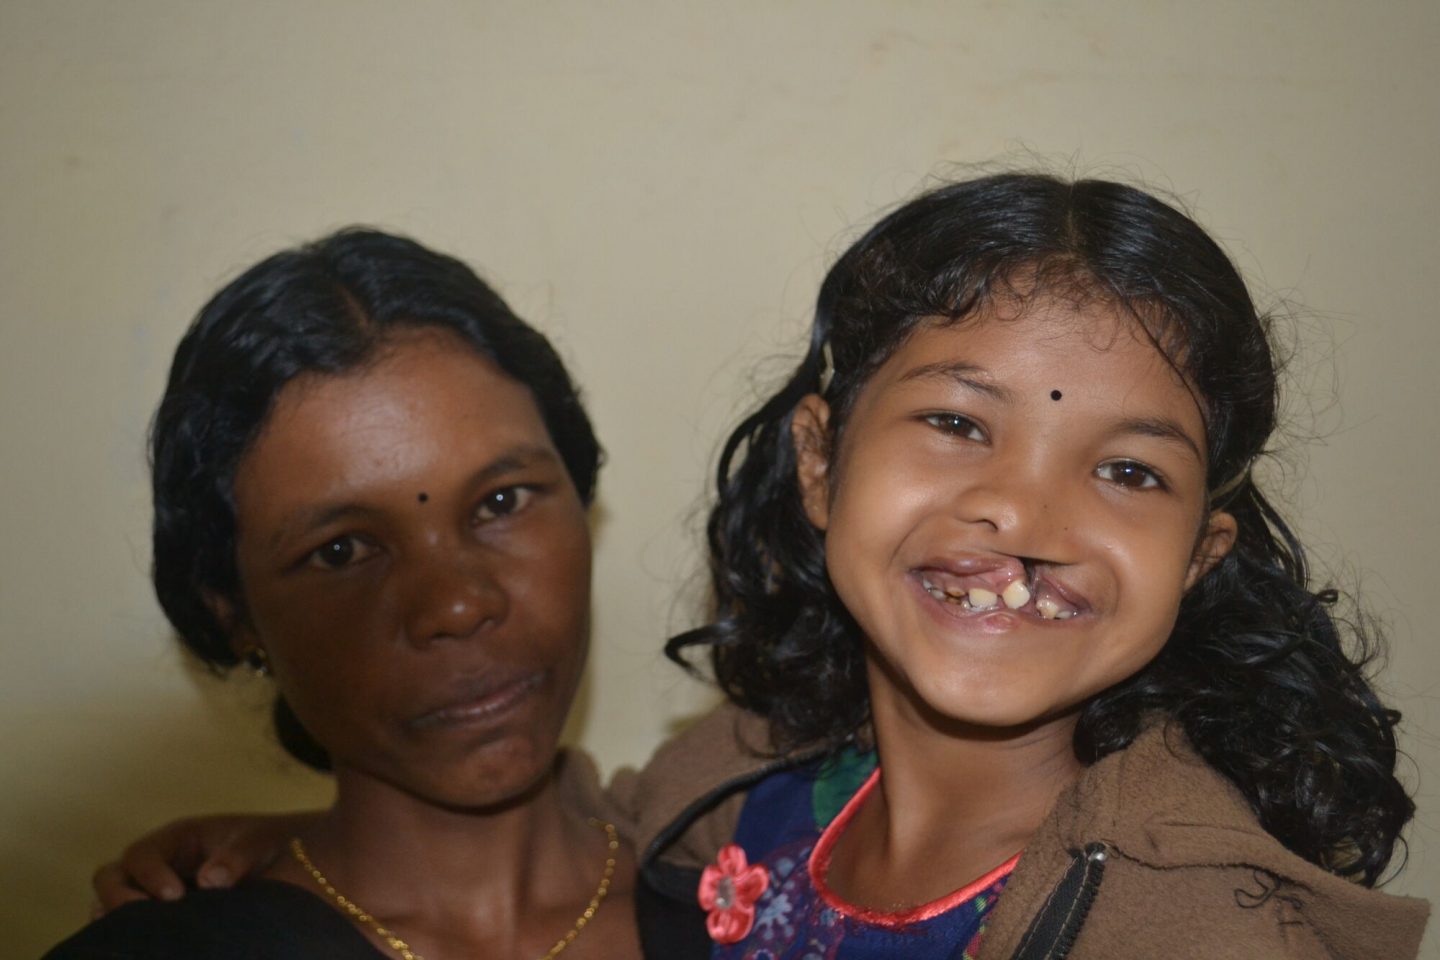 Soorya and her mother before the surgery for Soorya's cleft lip.